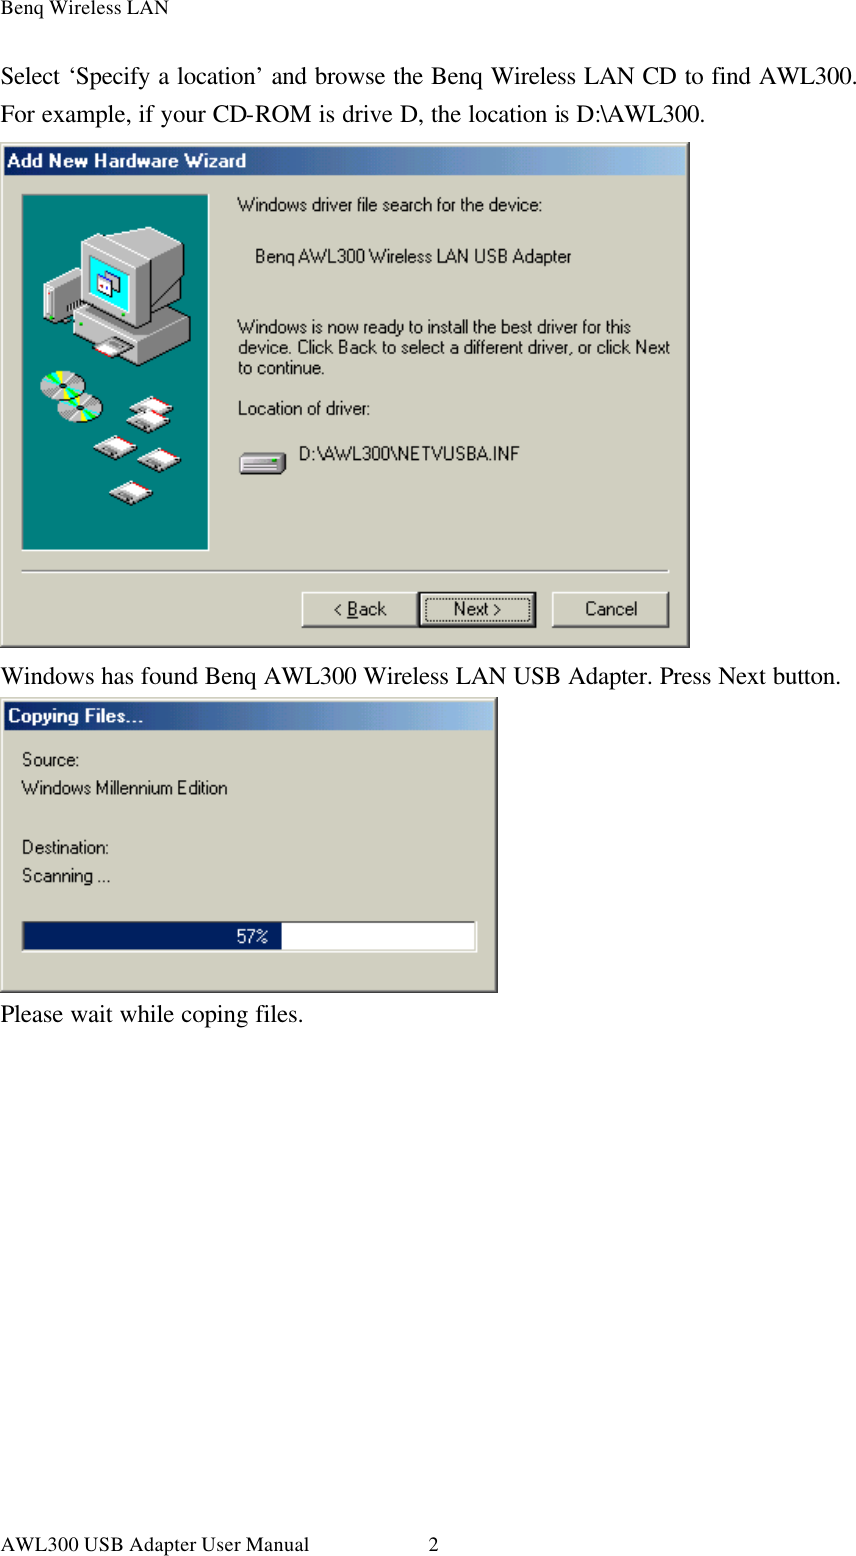 Benq Wireless LAN AWL300 USB Adapter User Manual 2Select ‘Specify a location’ and browse the Benq Wireless LAN CD to find AWL300. For example, if your CD-ROM is drive D, the location is D:\AWL300.  Windows has found Benq AWL300 Wireless LAN USB Adapter. Press Next button.  Please wait while coping files. 